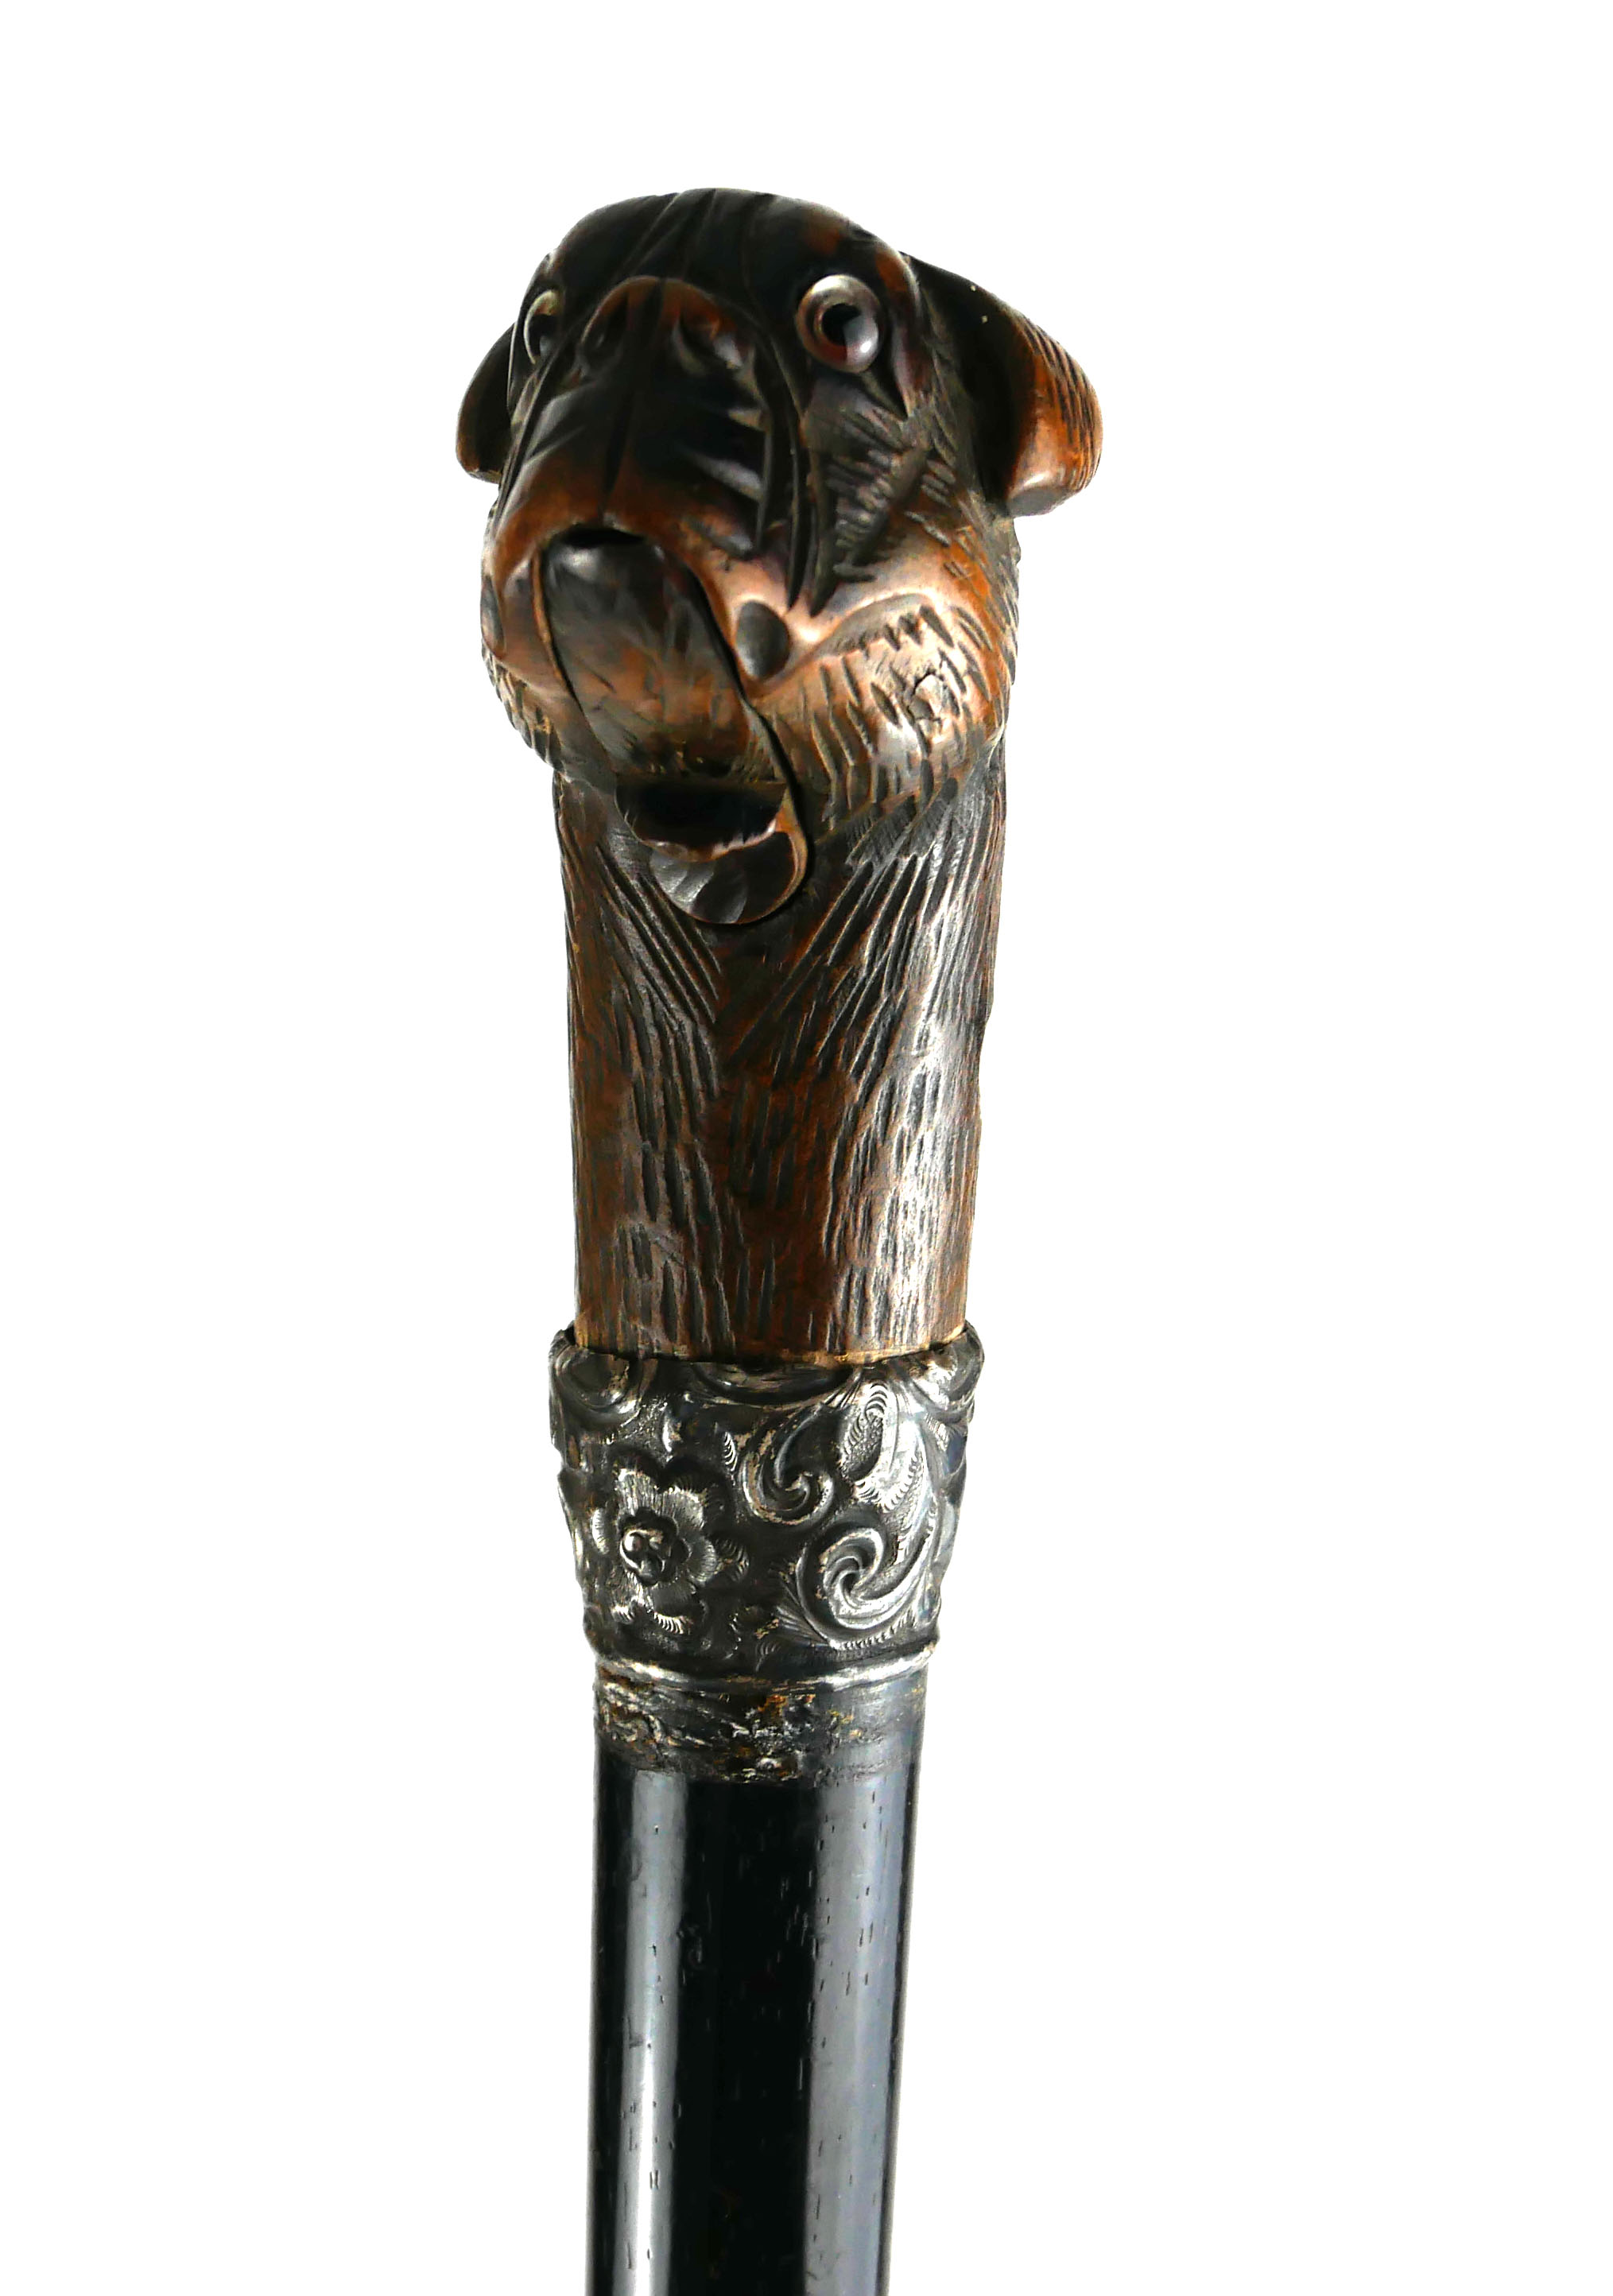 AN EDWARDIAN WALKING STICK With carved handle in the form of pug with articulated mouth and glass